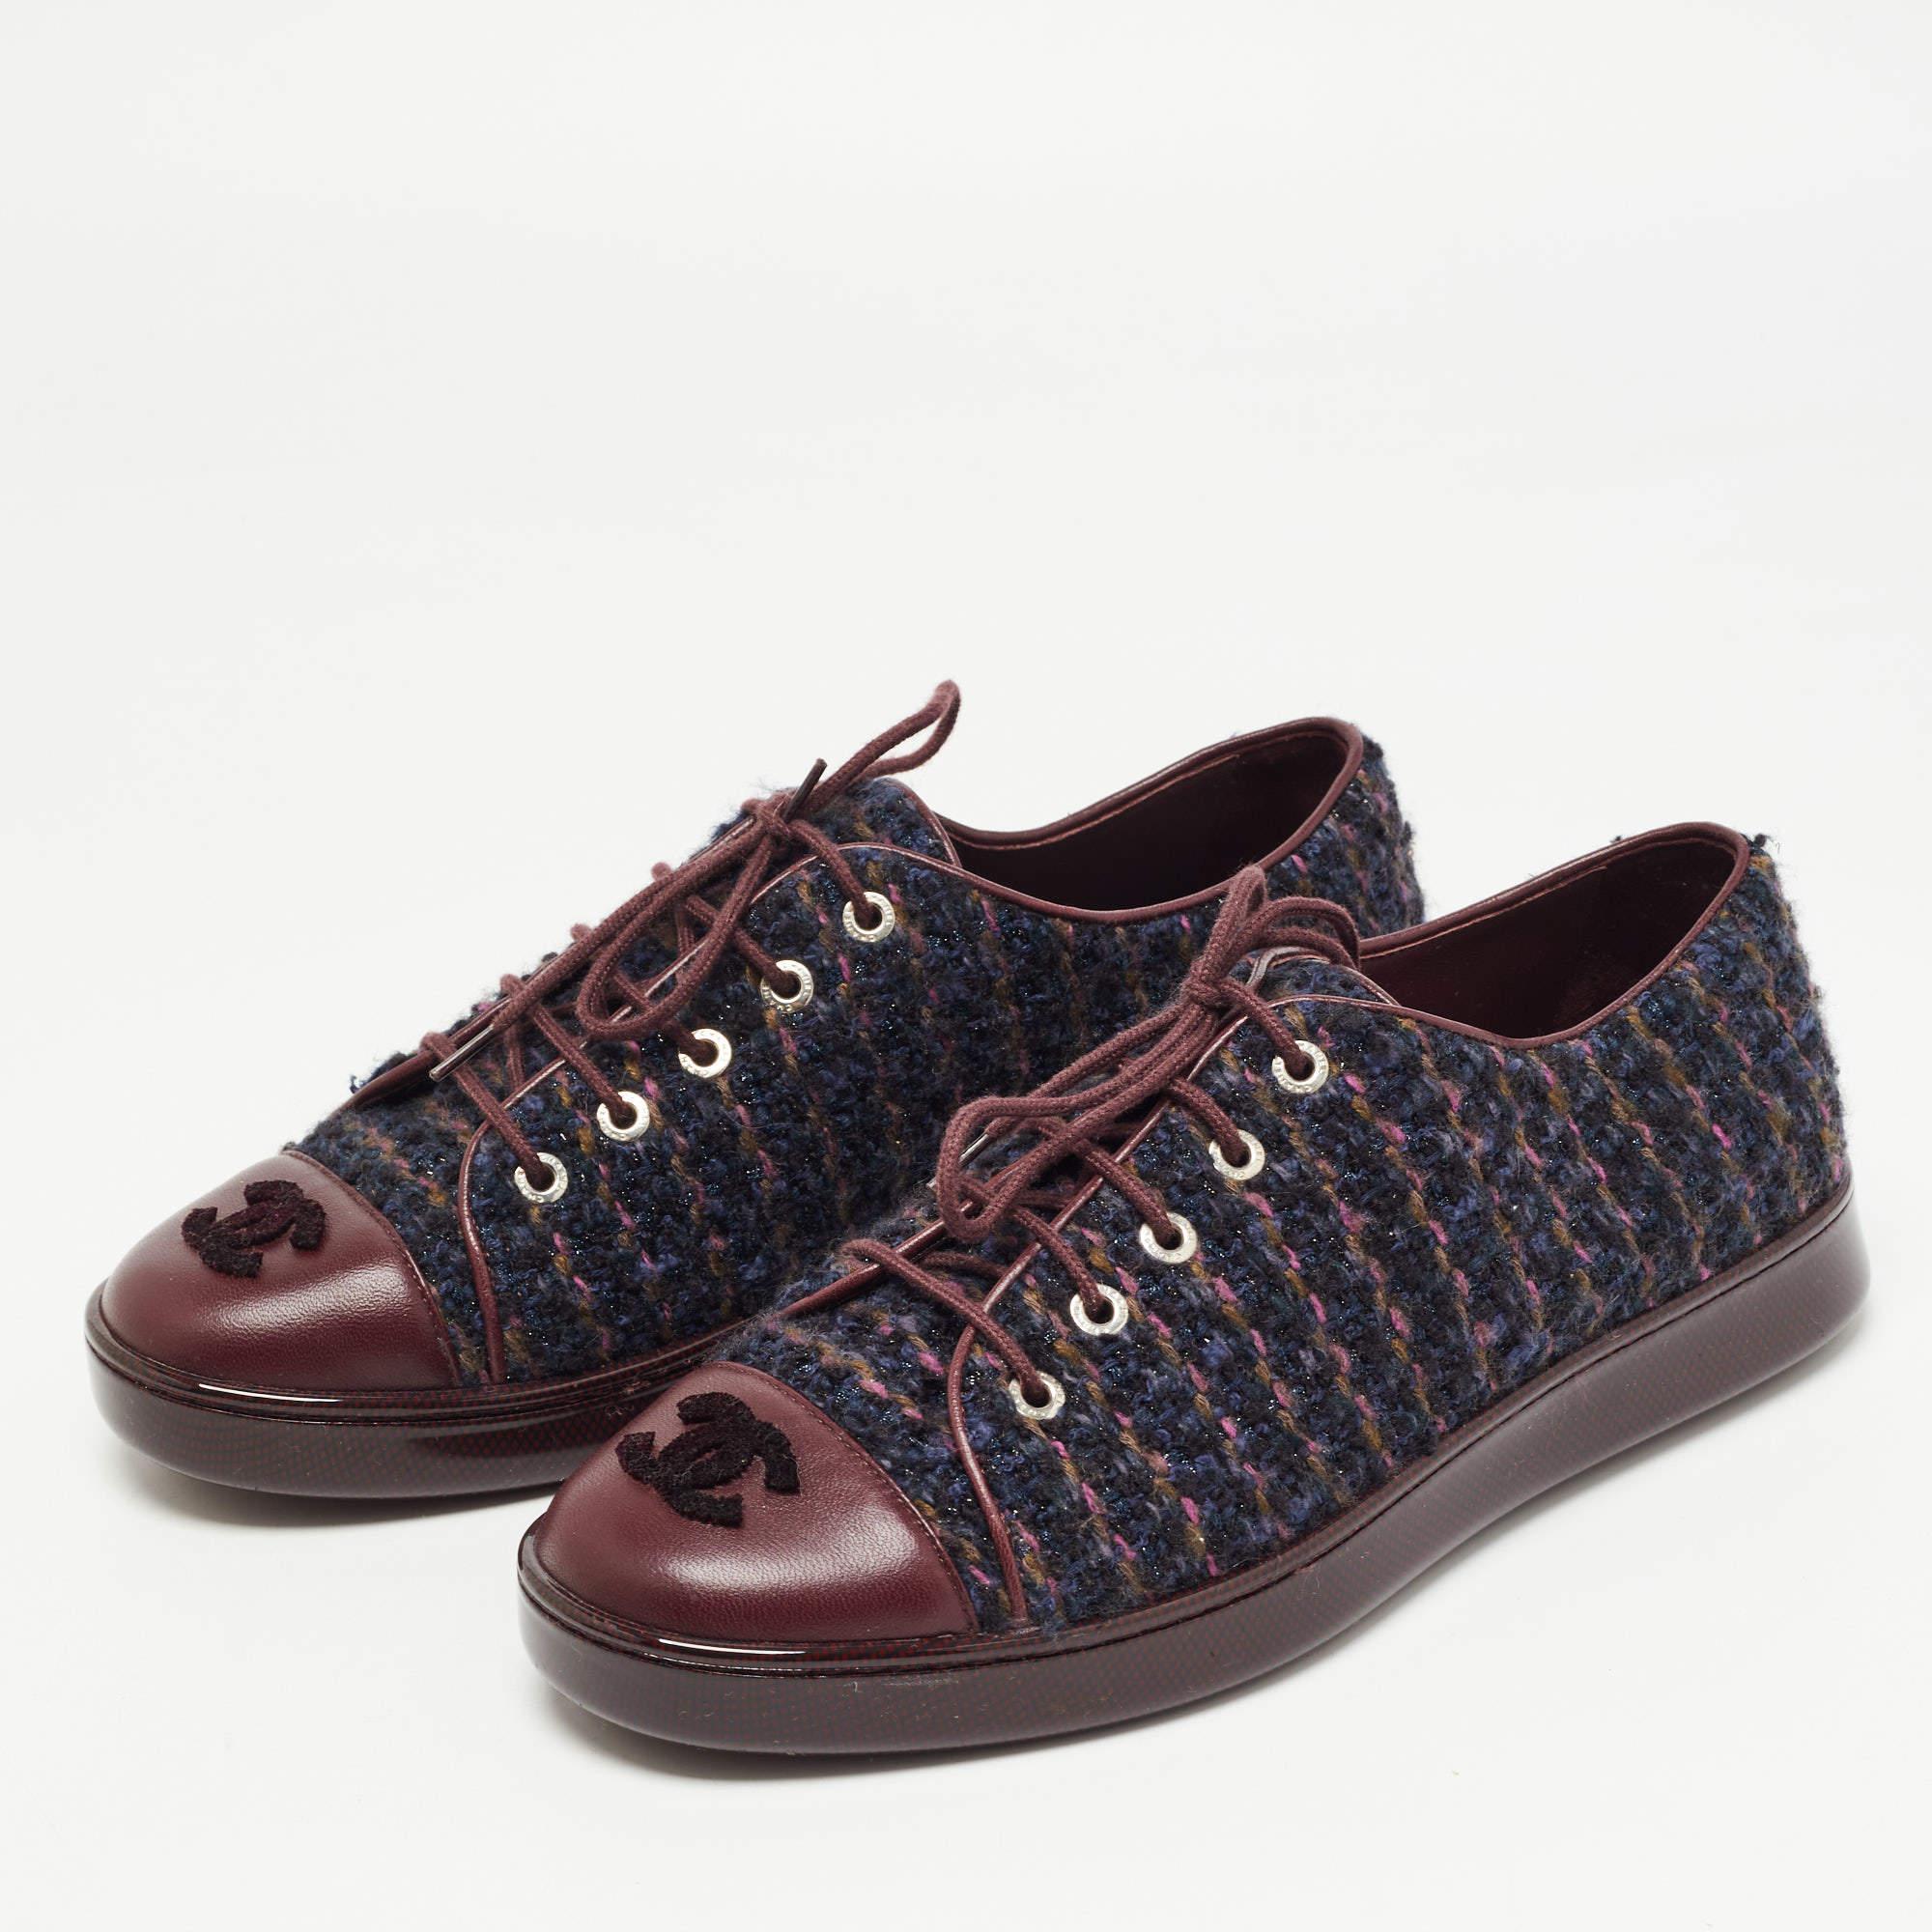 These stunning sneakers by Chanel are high on comfort and style. Crafted from tweed and leather, these burgundy sneakers feature cap toes, lace-ups on the vamps, and silver-tone hardware. Wear them with cropped pants or culottes for a smart look.

